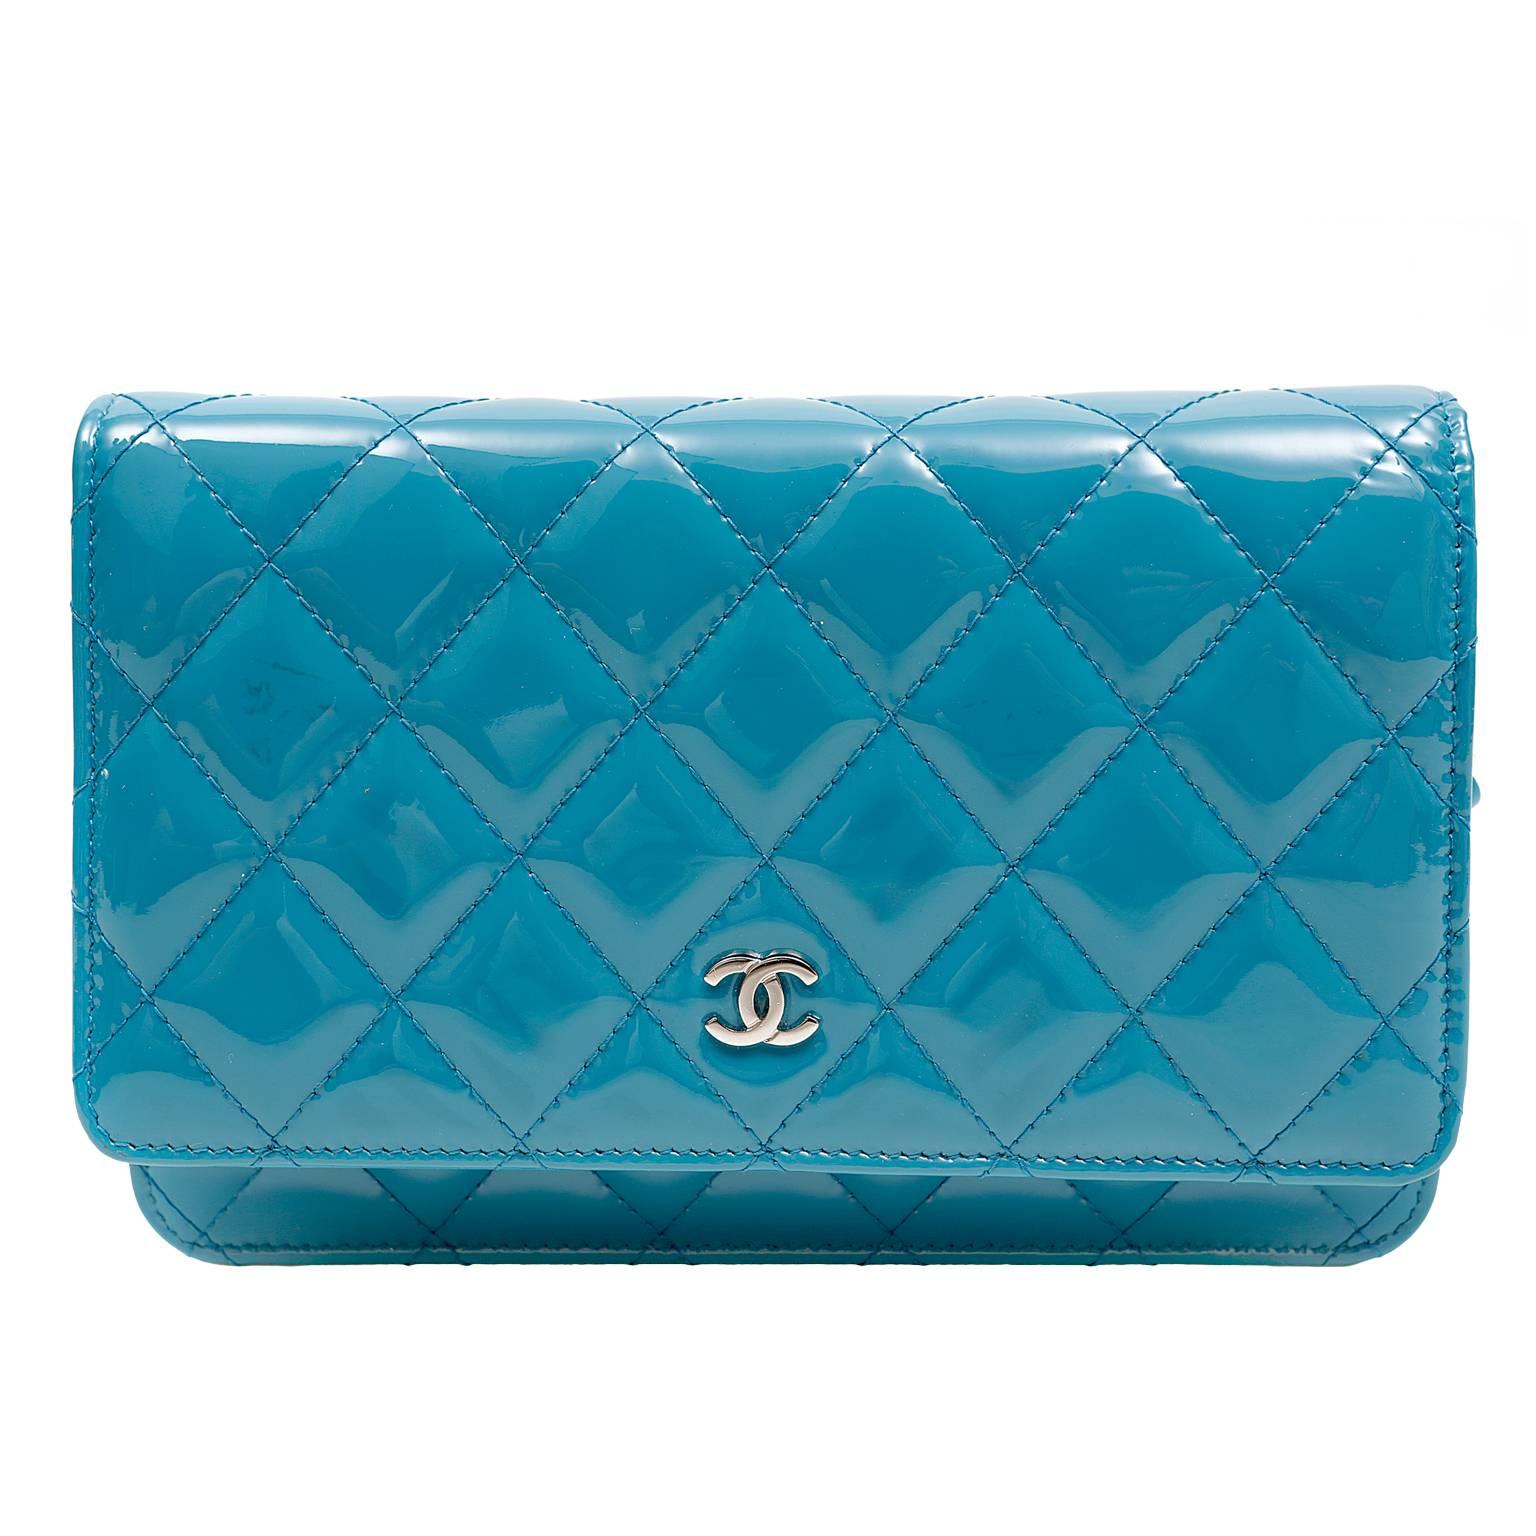 Chanel Turquoise Patent Leather Wallet on a Chain WOC- Silver HW